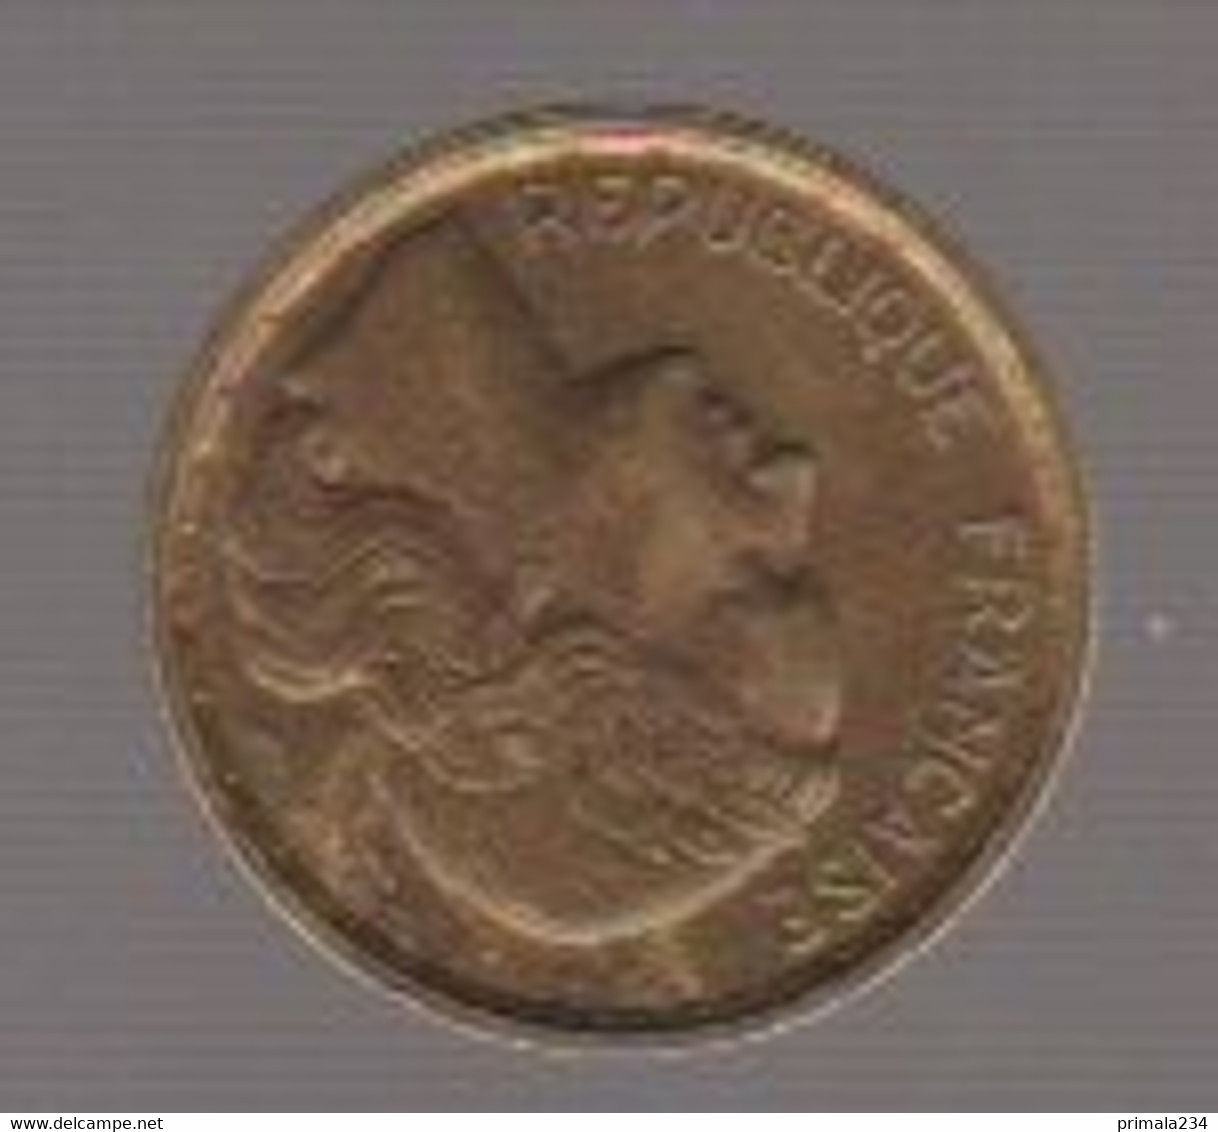 10 FRANCS 1951 B - - Other - Europe